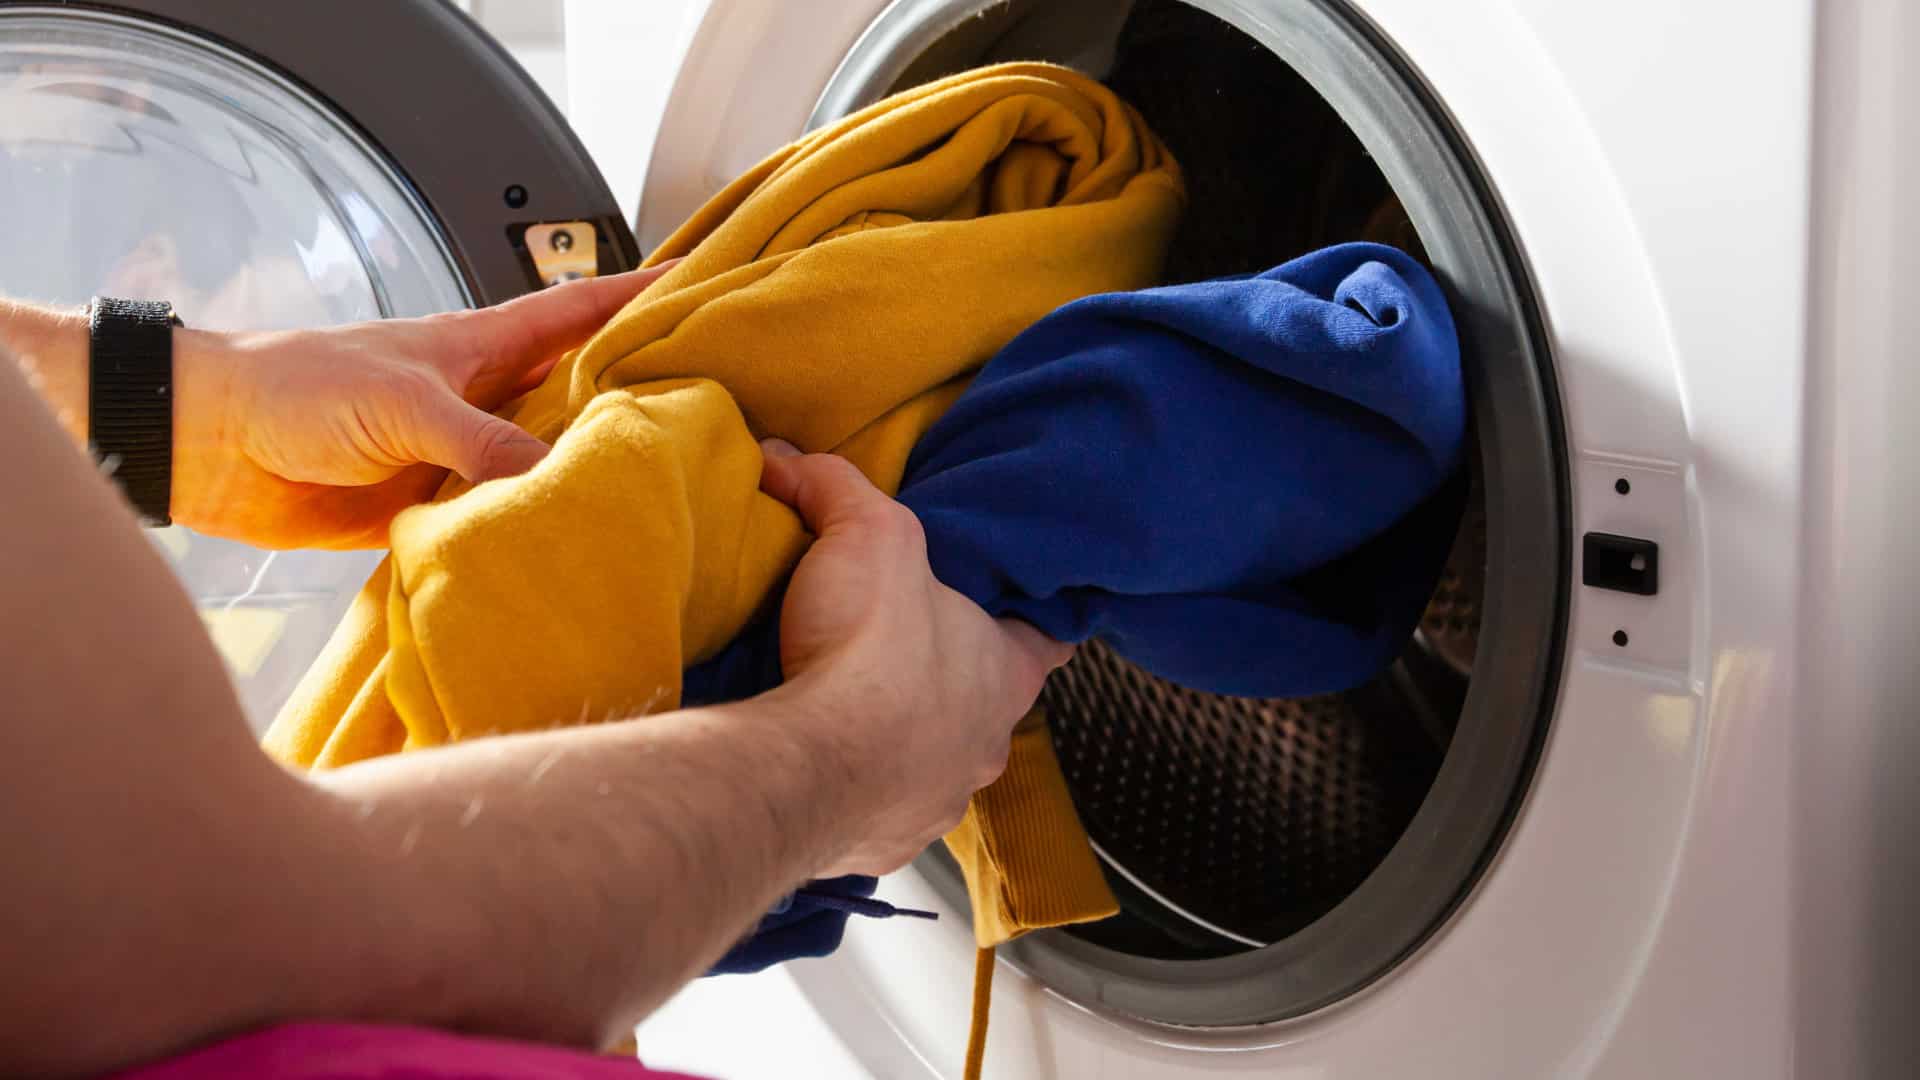 How to Clean Electrolux Front-Load Washer - Fred's Appliance Academy